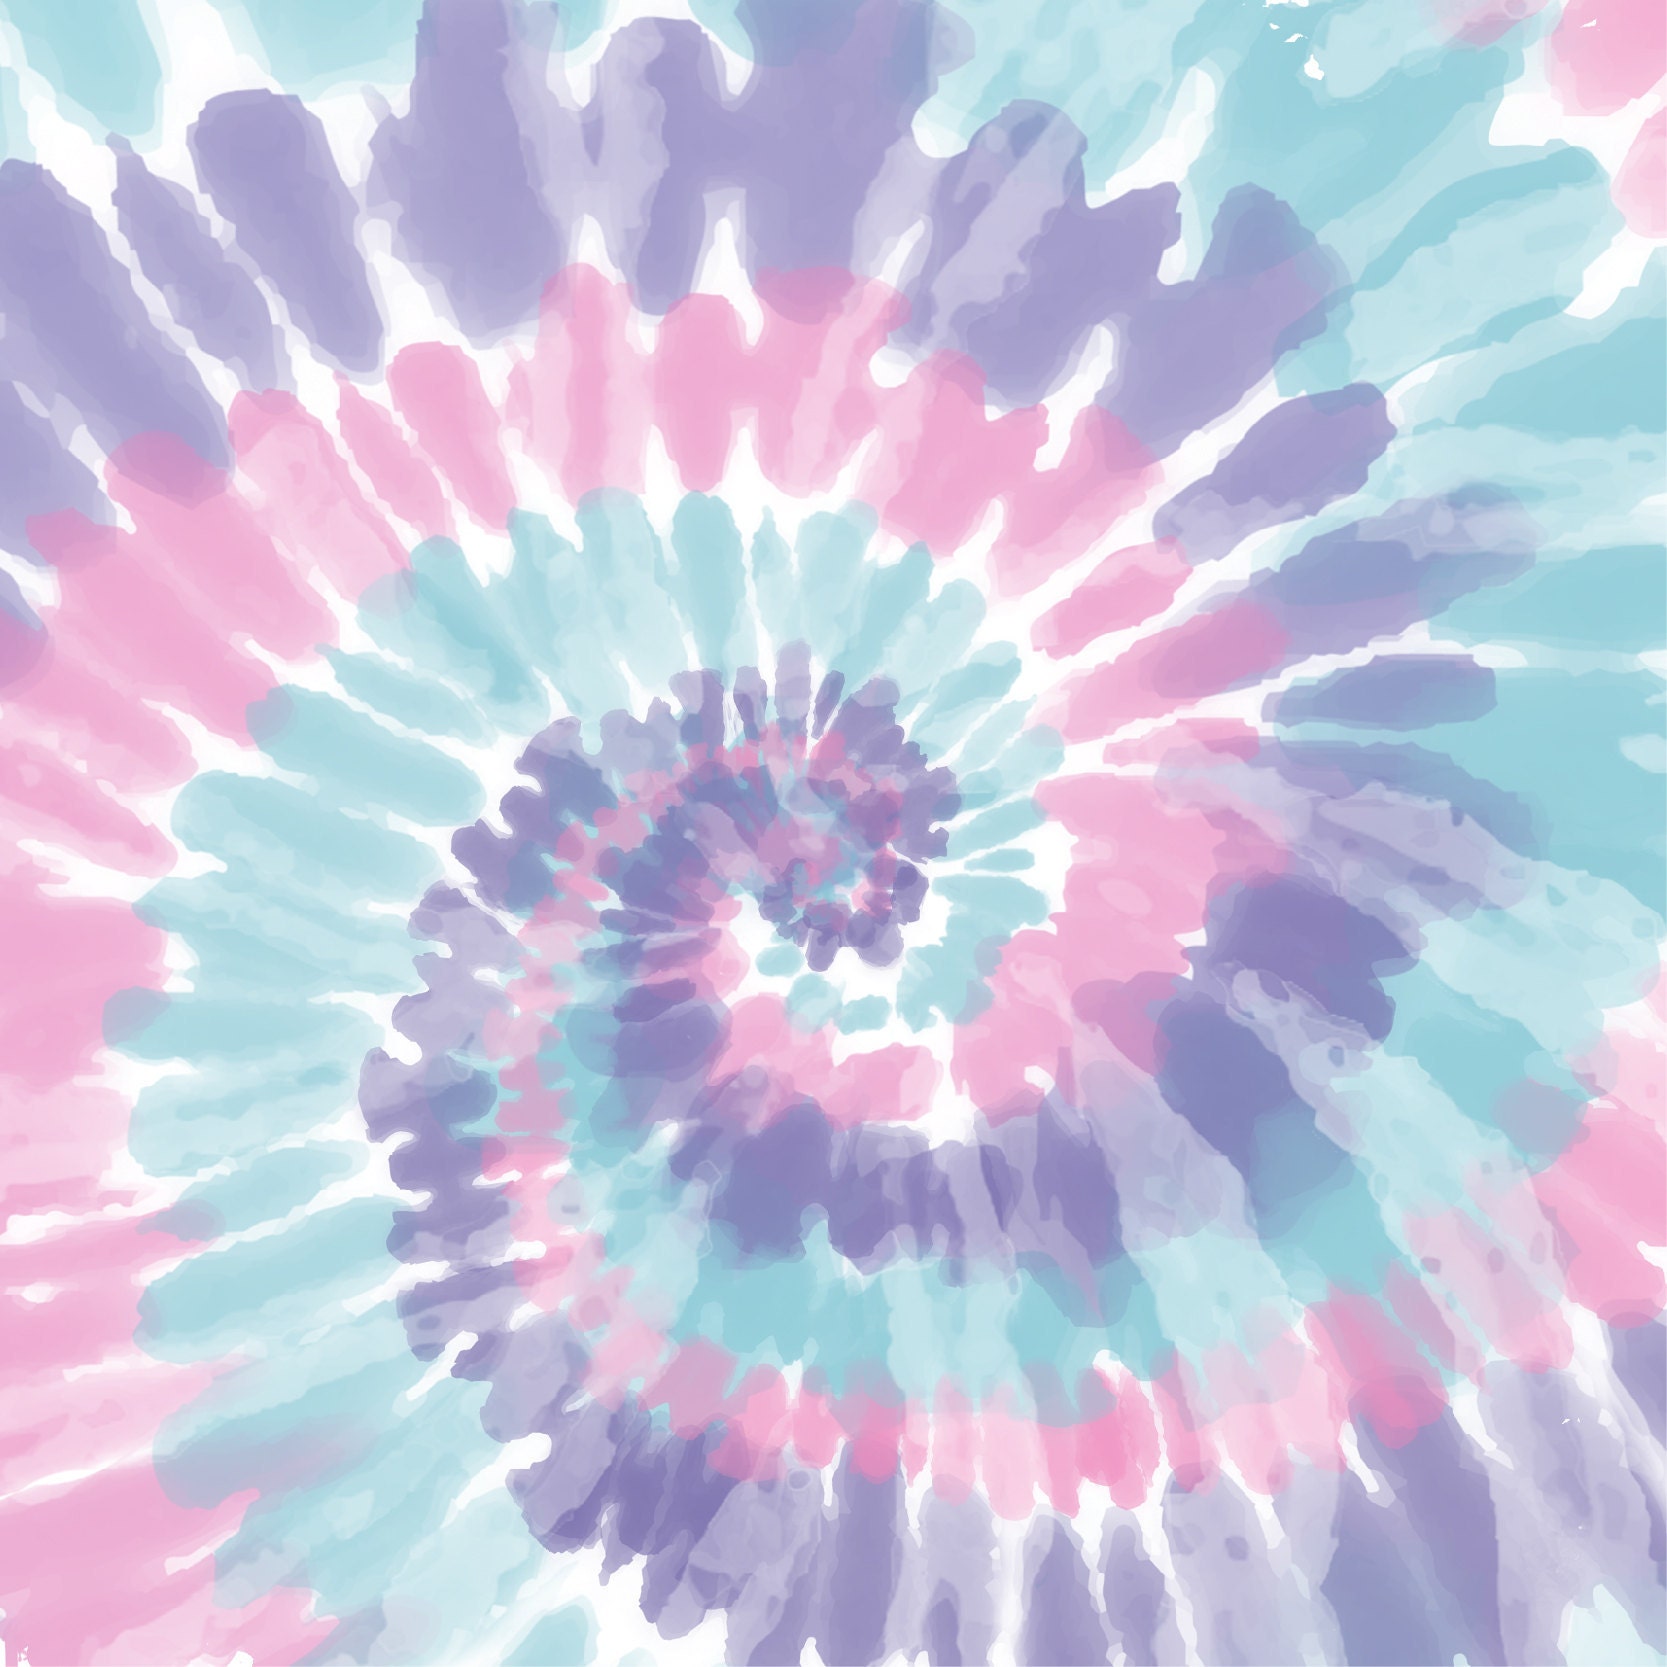 Abstract pastel tie-dye background. Abstract painted texture with shades of  pink, blue and white Stock Illustration